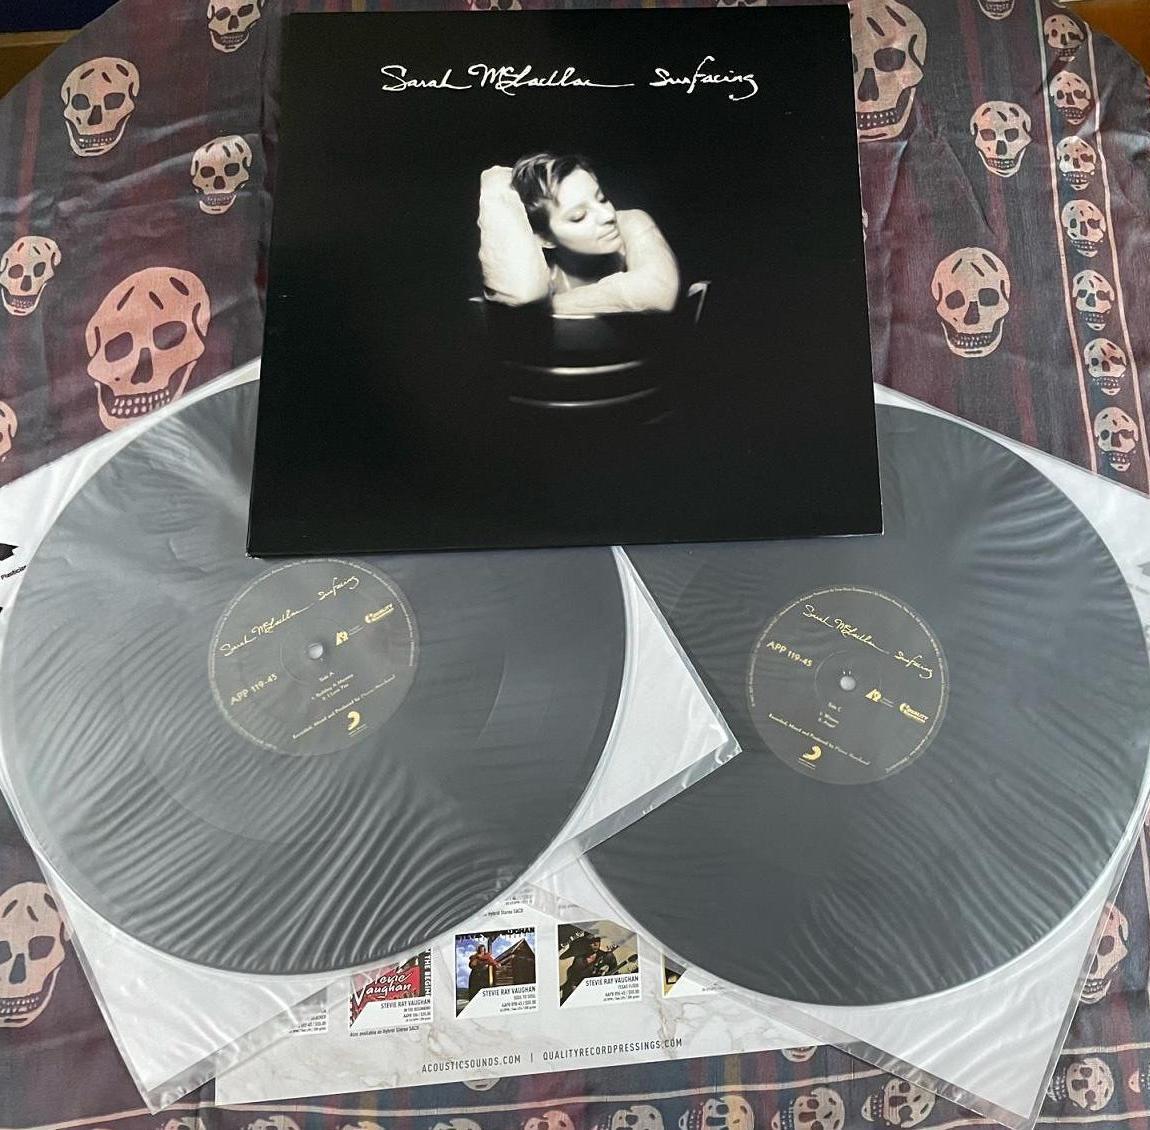 ! beautiful goods!Sarah McLachlan - Surfacing/ reproduction 1 times / sound stone chip none / height sound quality record /45 rotation /200g weight record /Analogue Productions/ Sara * MacLachlan 